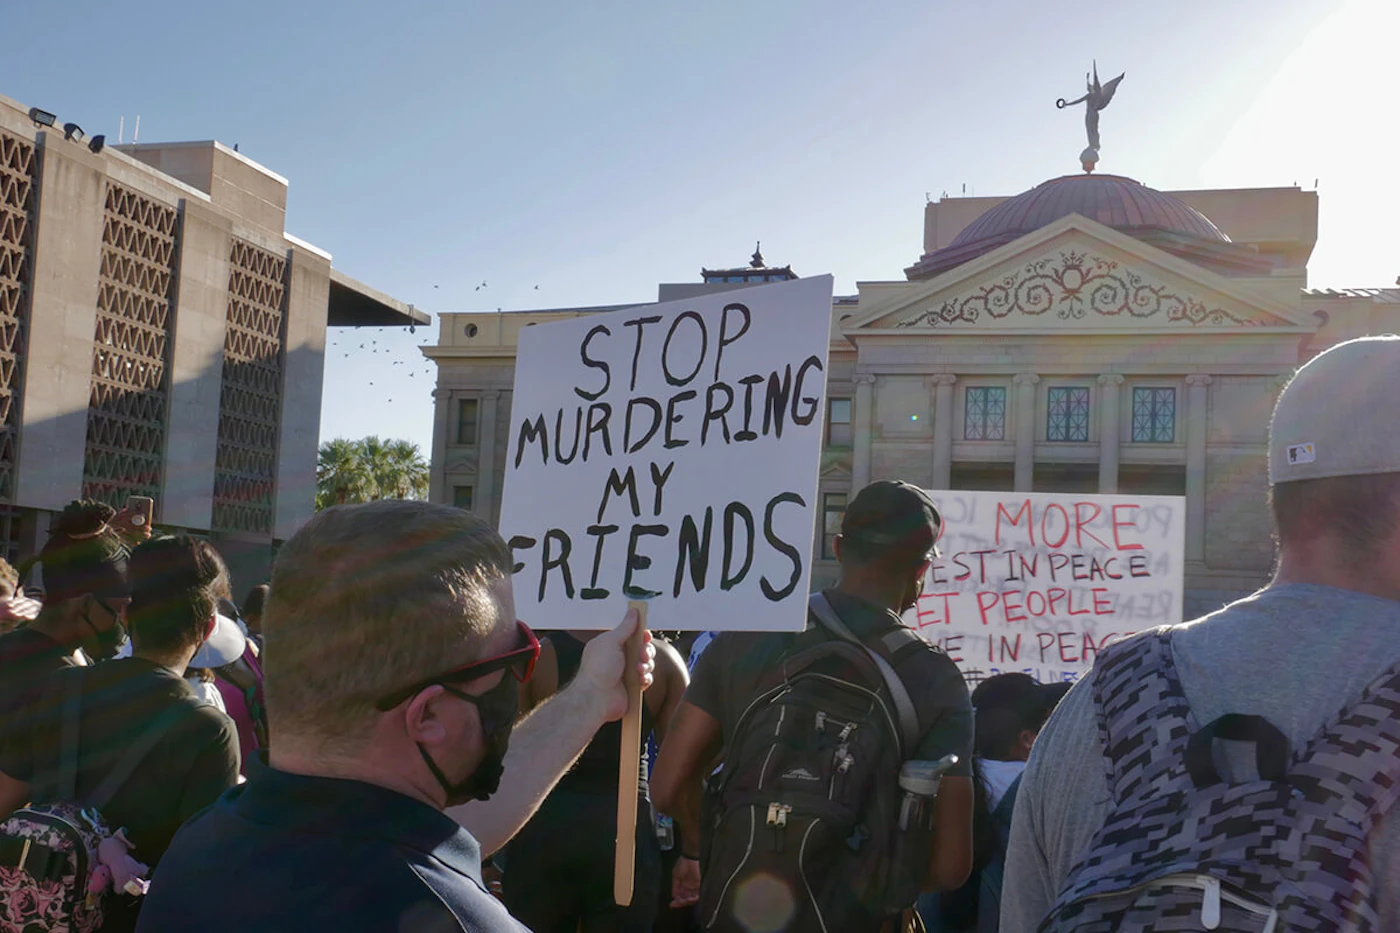 man holding sign at Phoenix protest that says "stop murdering my friends"